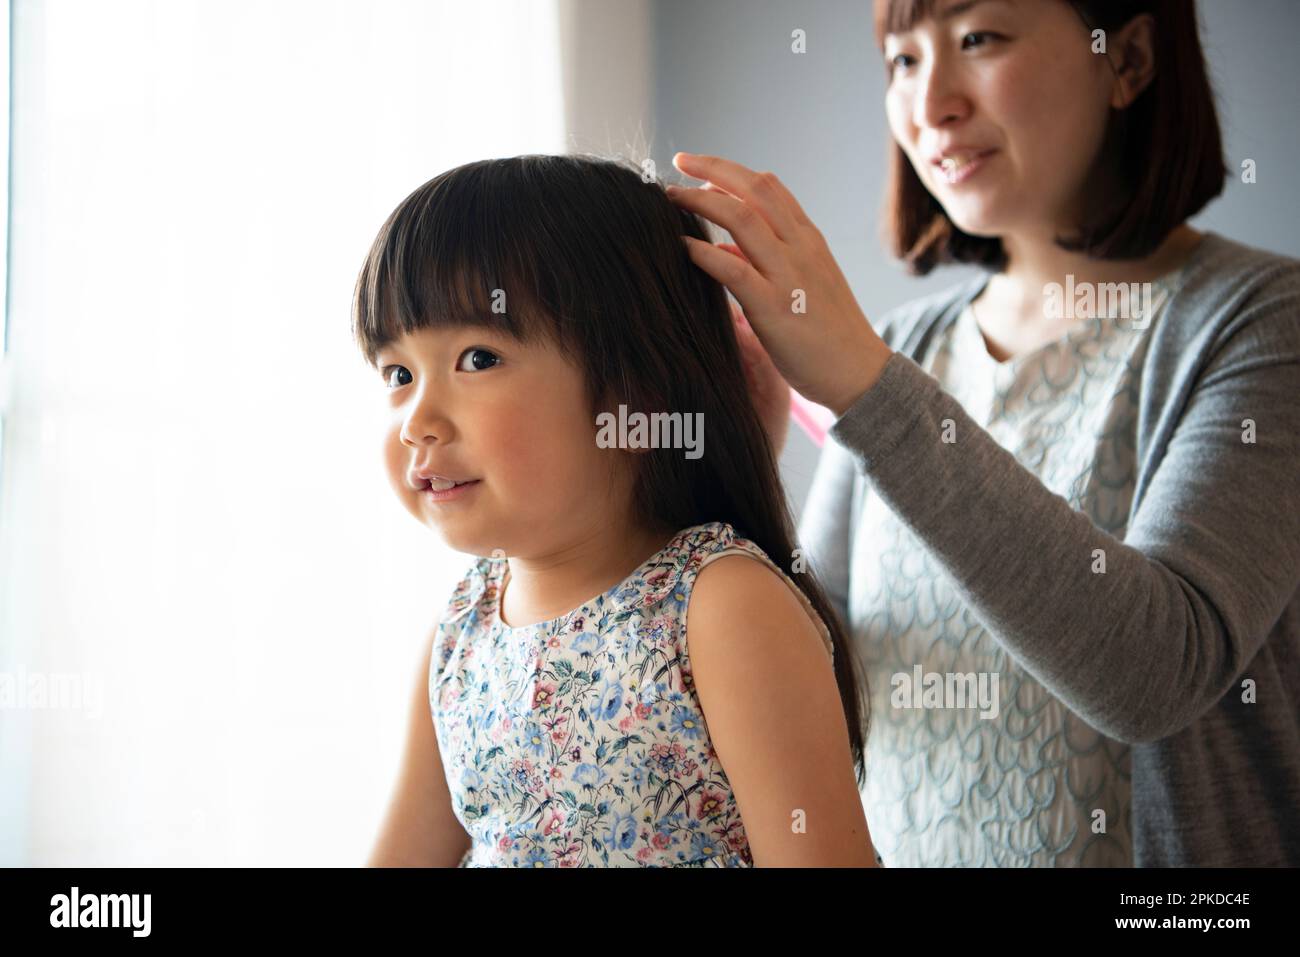 Mother combing girl's hair Stock Photo